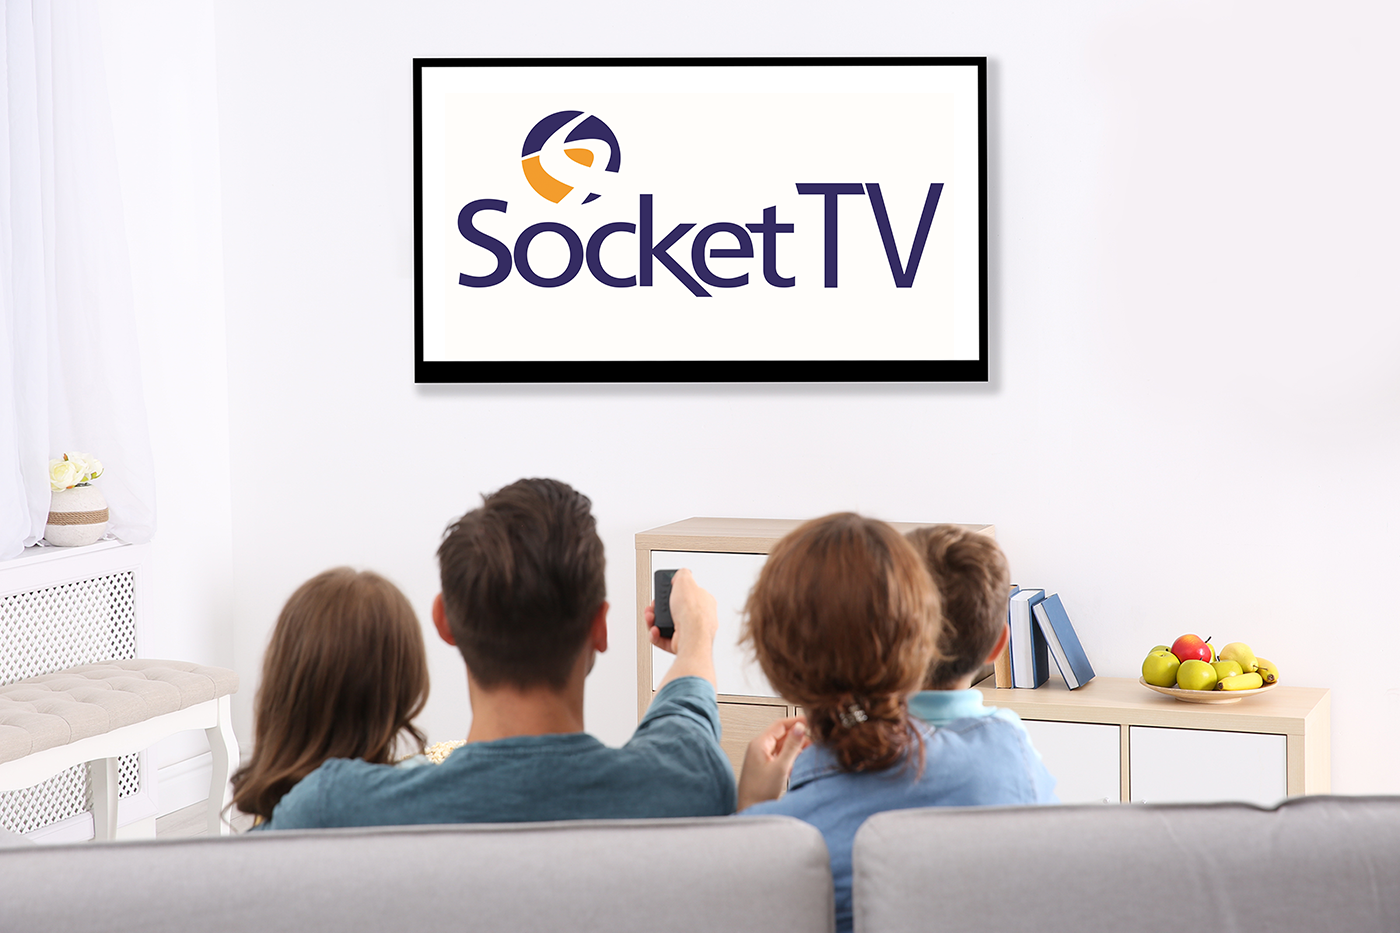 family watching socket tv on their television